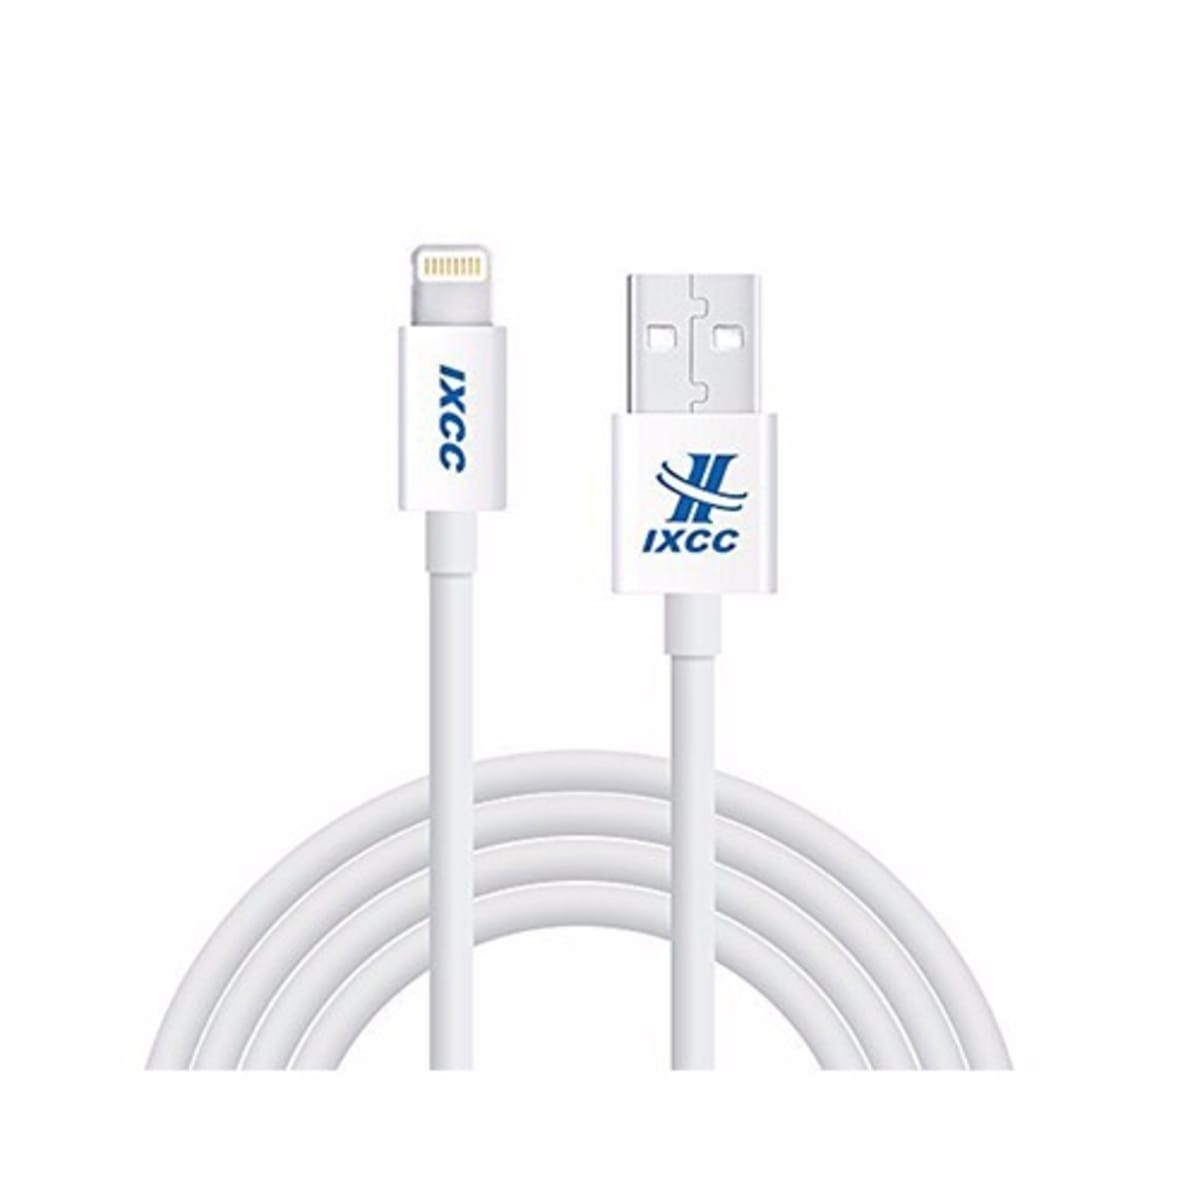 Cable USB a Lightning iphone 8pin